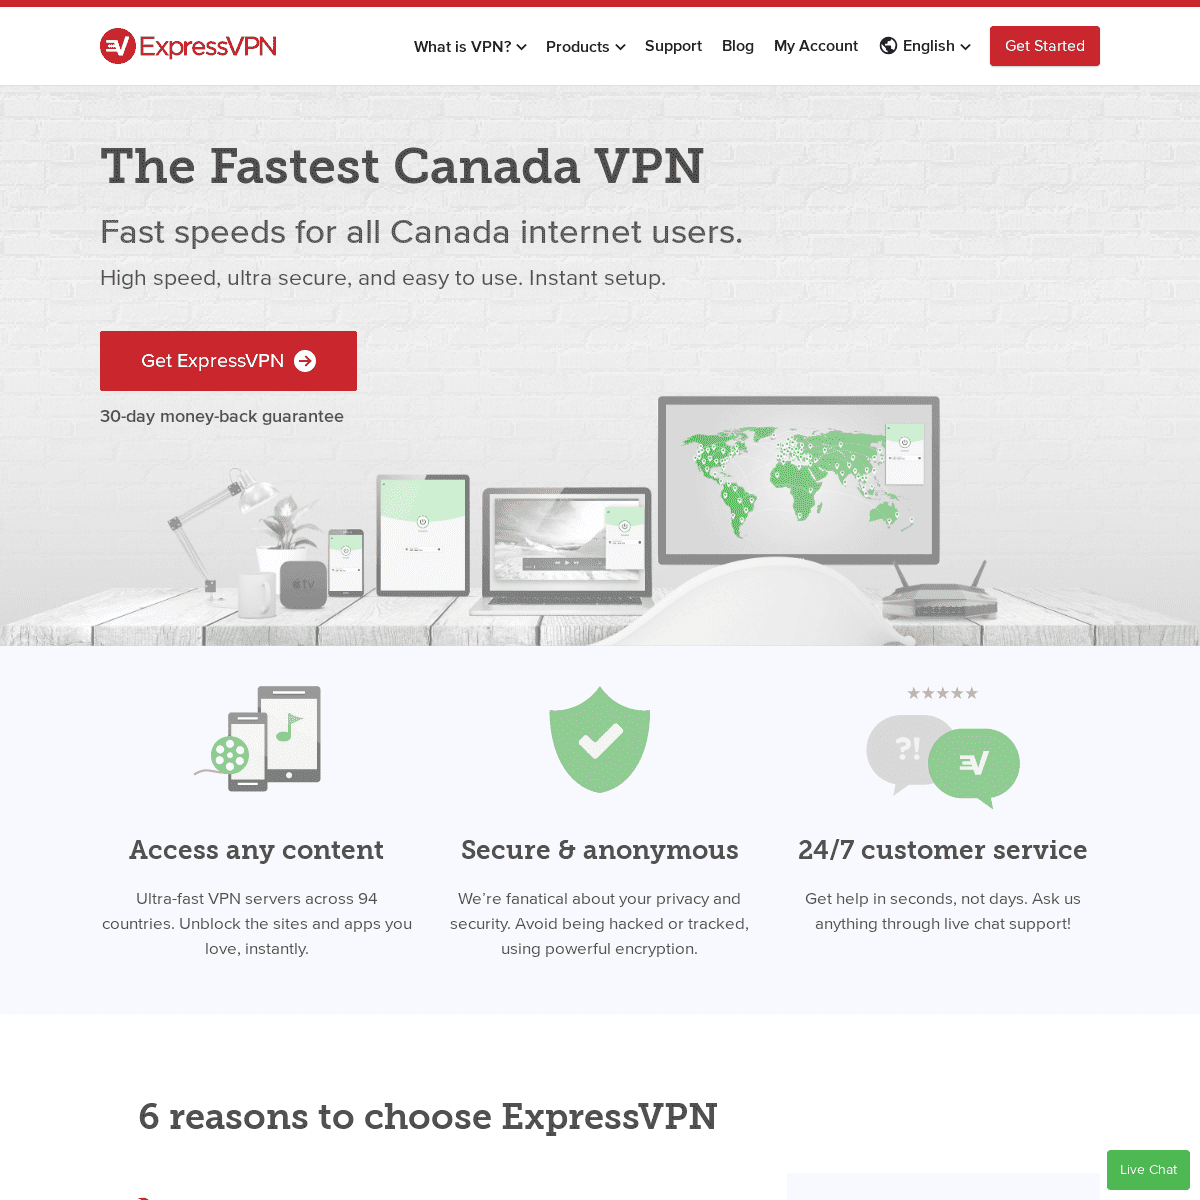 ExpressVPN - A Fast and Secure VPN for Canada